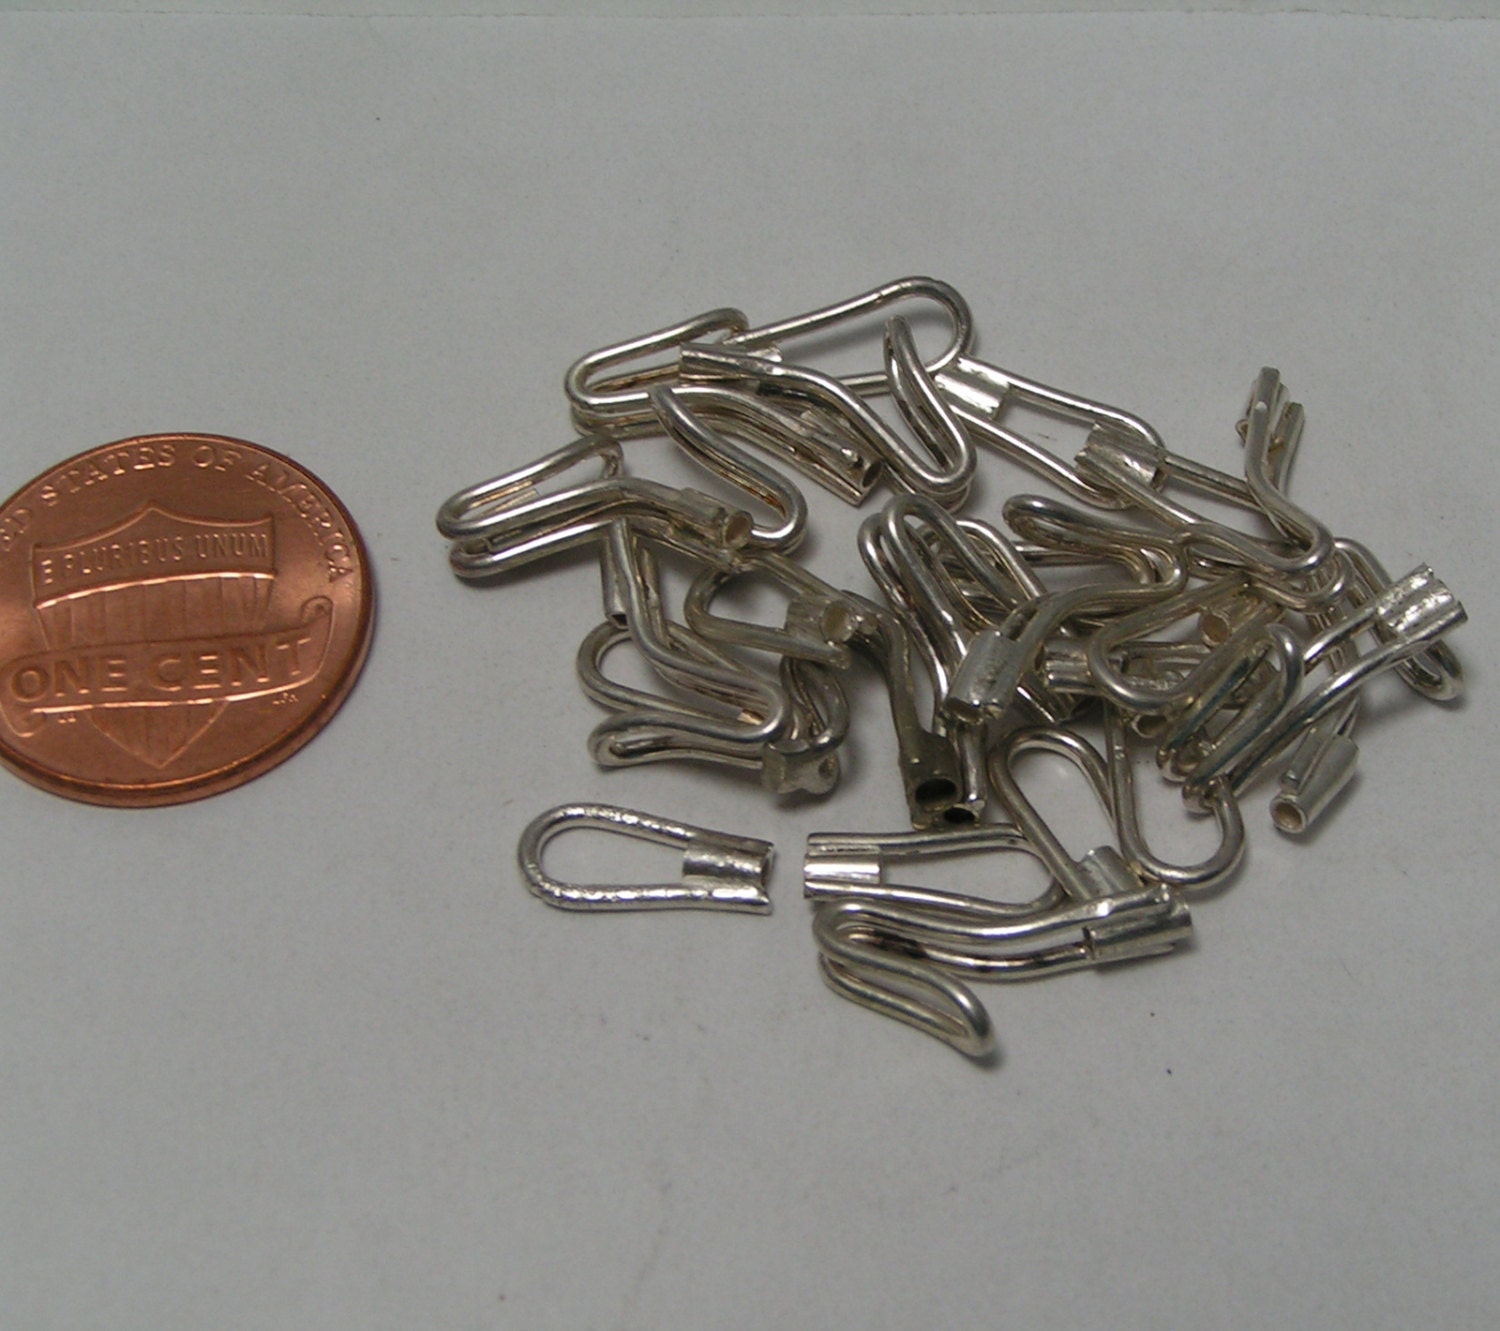 One Package of 12 sets of Sterling Silver Crimp Style Hooks and Eyes ...